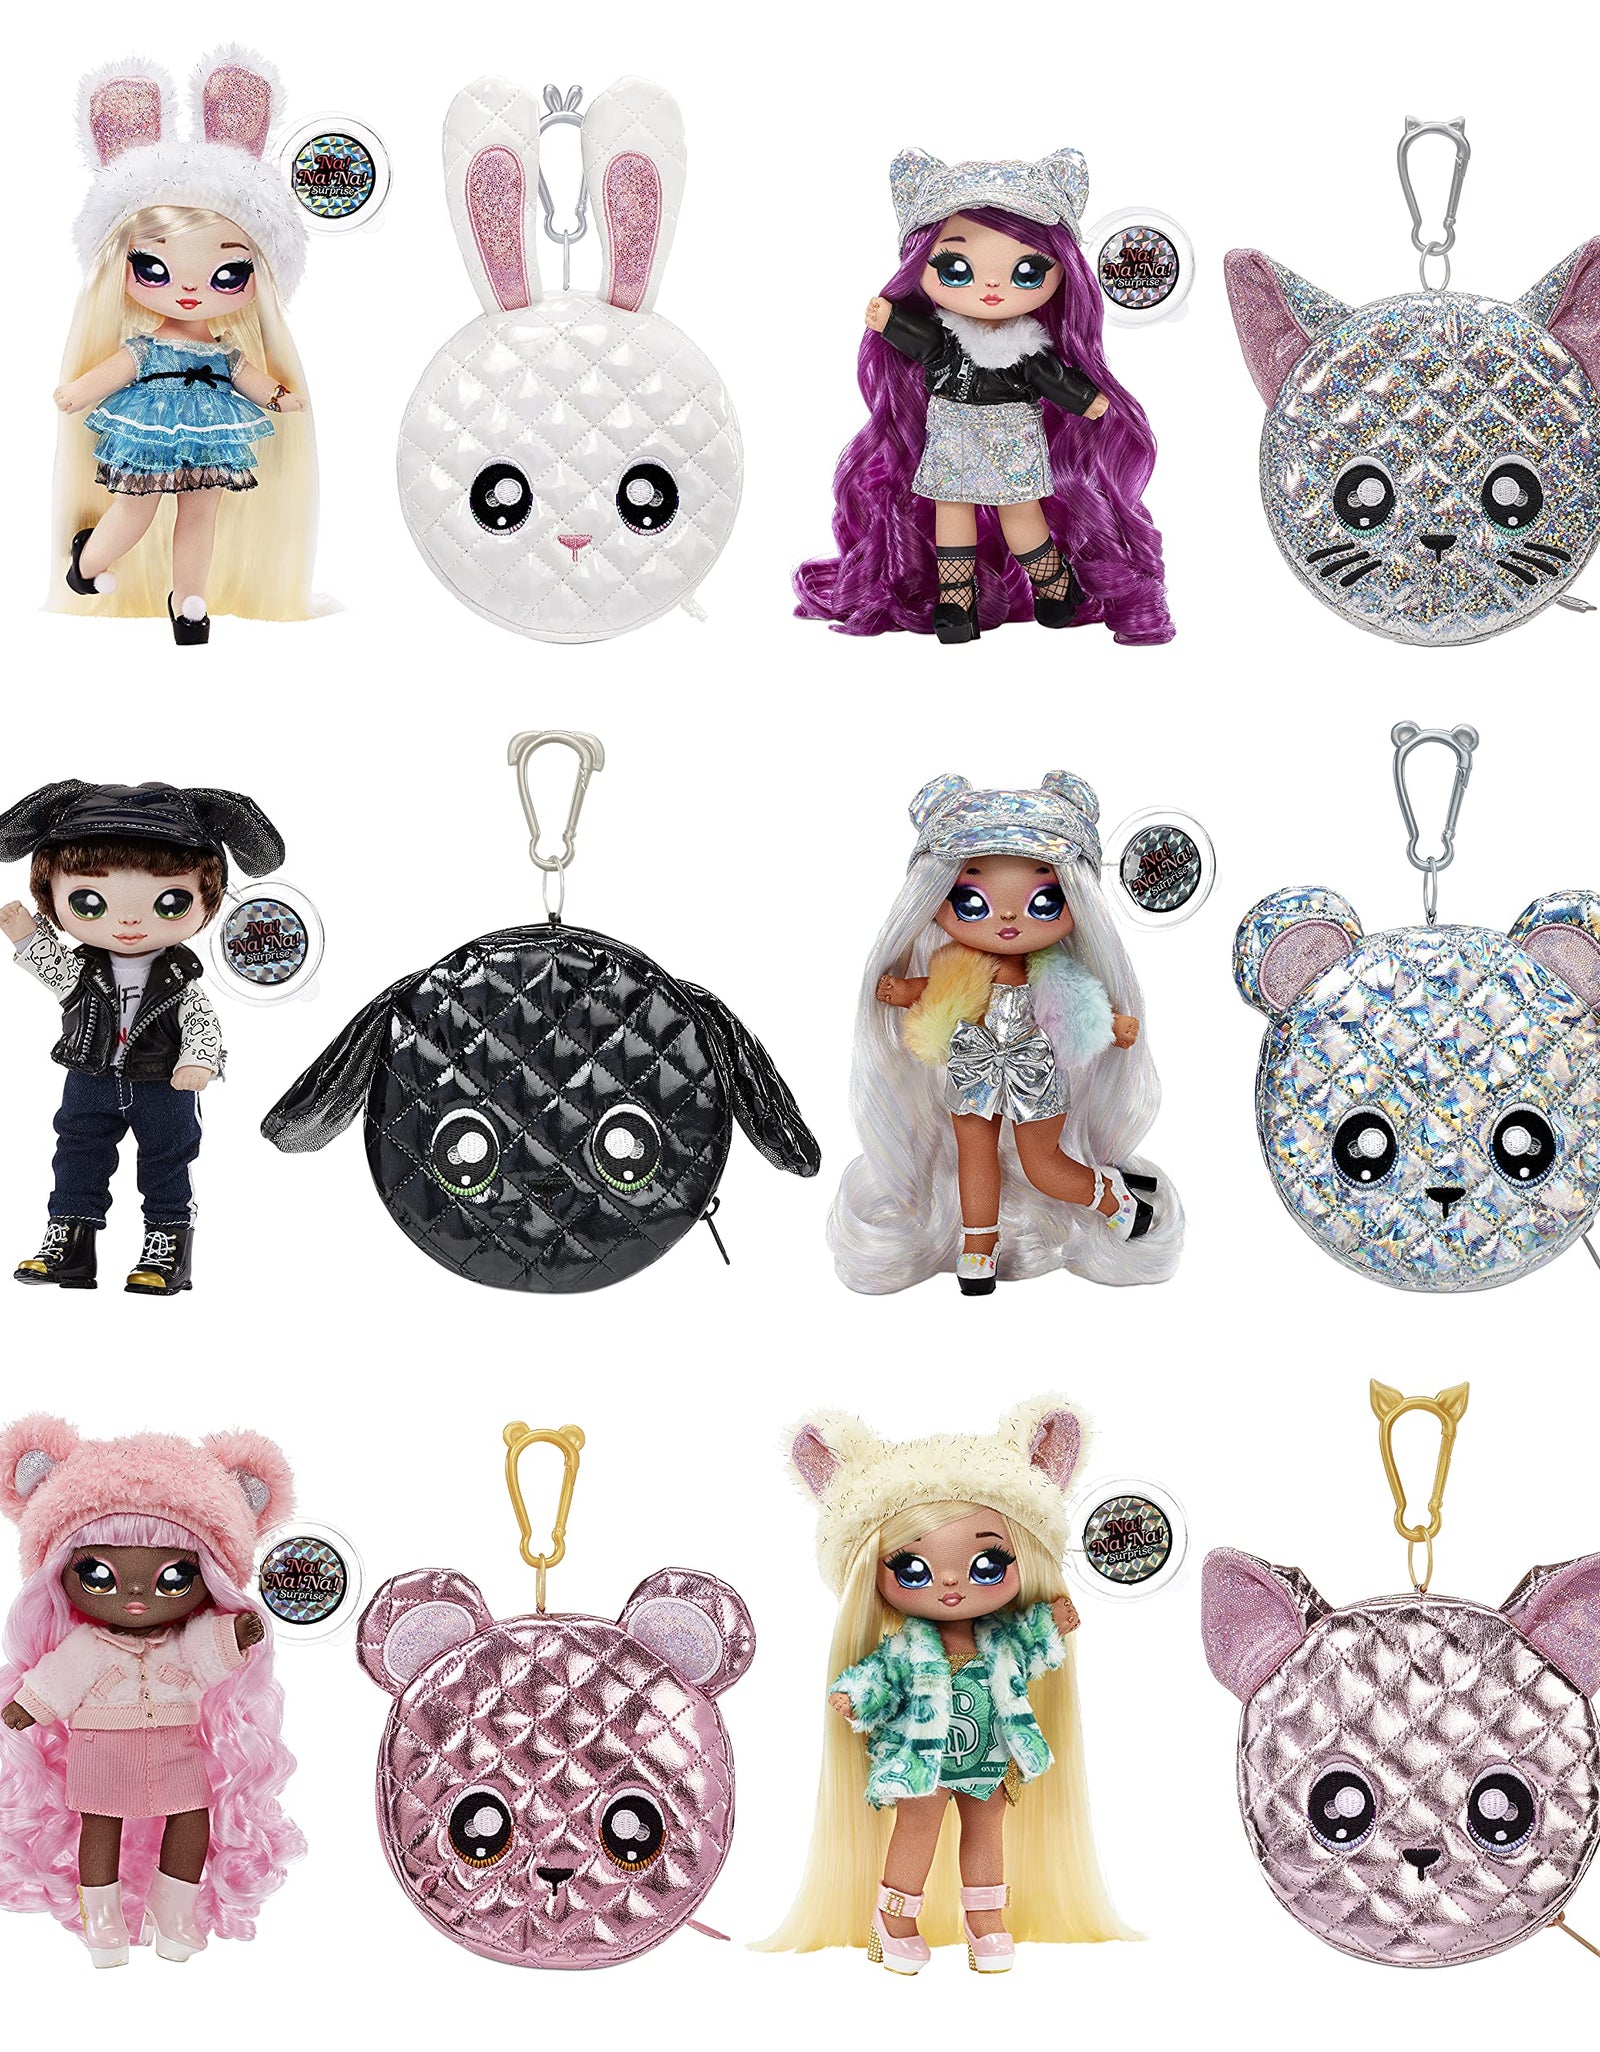 Na Na Na Surprise Glam Series Chrissy Diamond Fashion Doll & Metallic Cat Purse, Purple Hair, Cute Kitty Ear Hat Outfit & Accessories, 2-in-1 Gift for Kids, Toy for Girls & Boys Ages 5 6 7 8+ Years